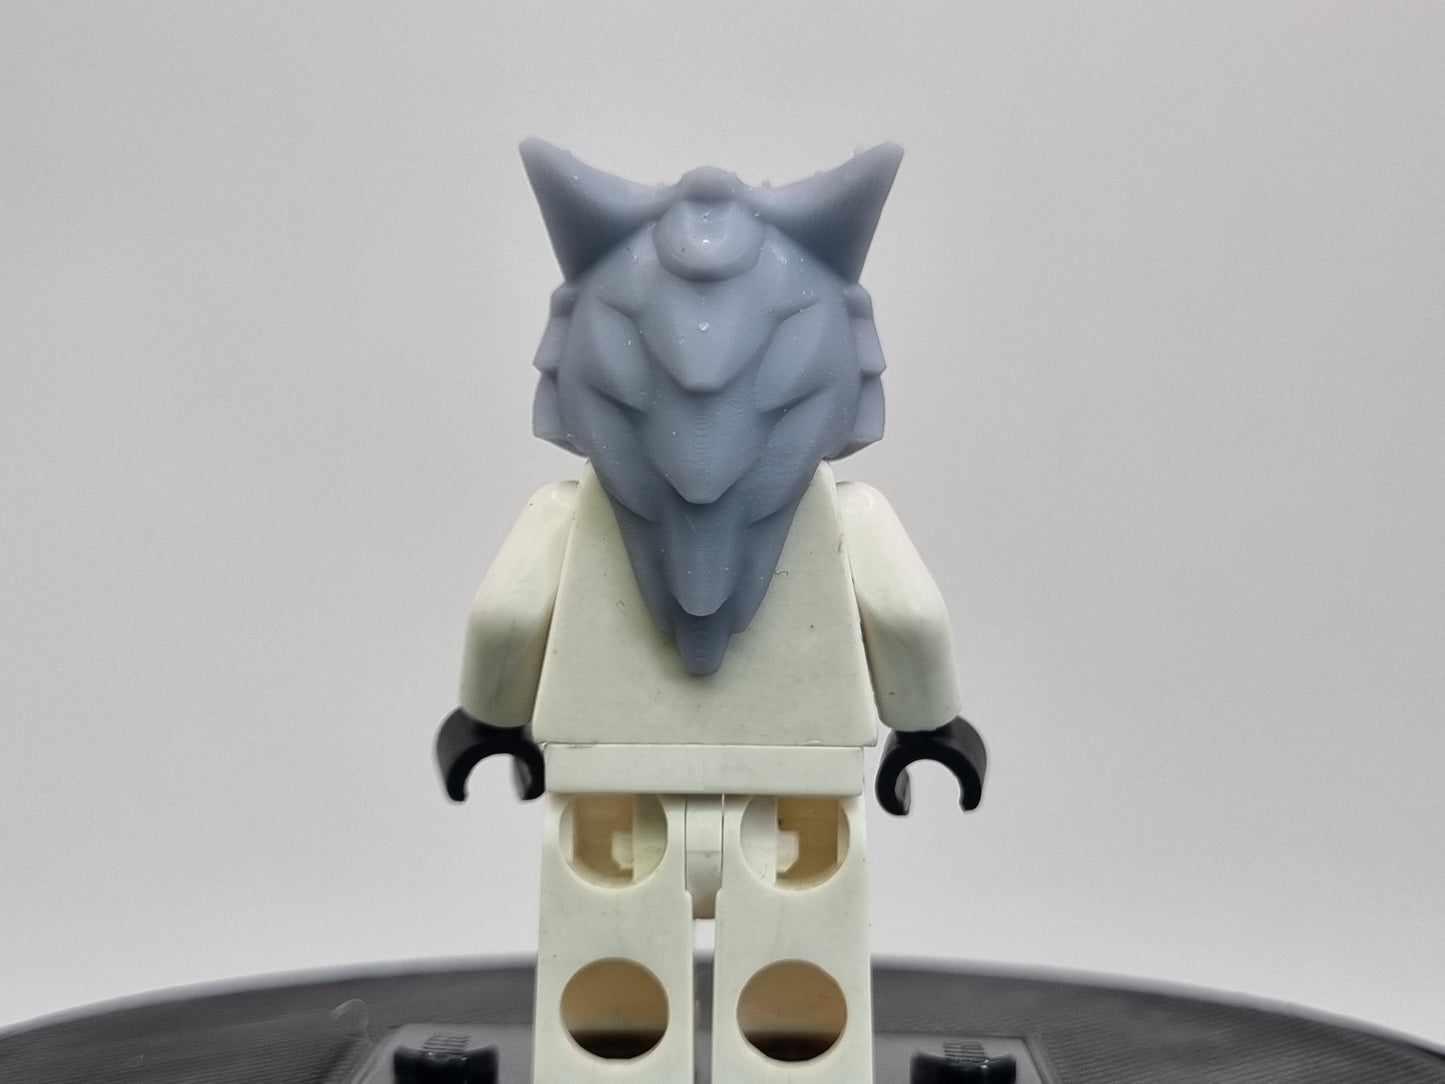 lego compatible 3D printed wolf head!